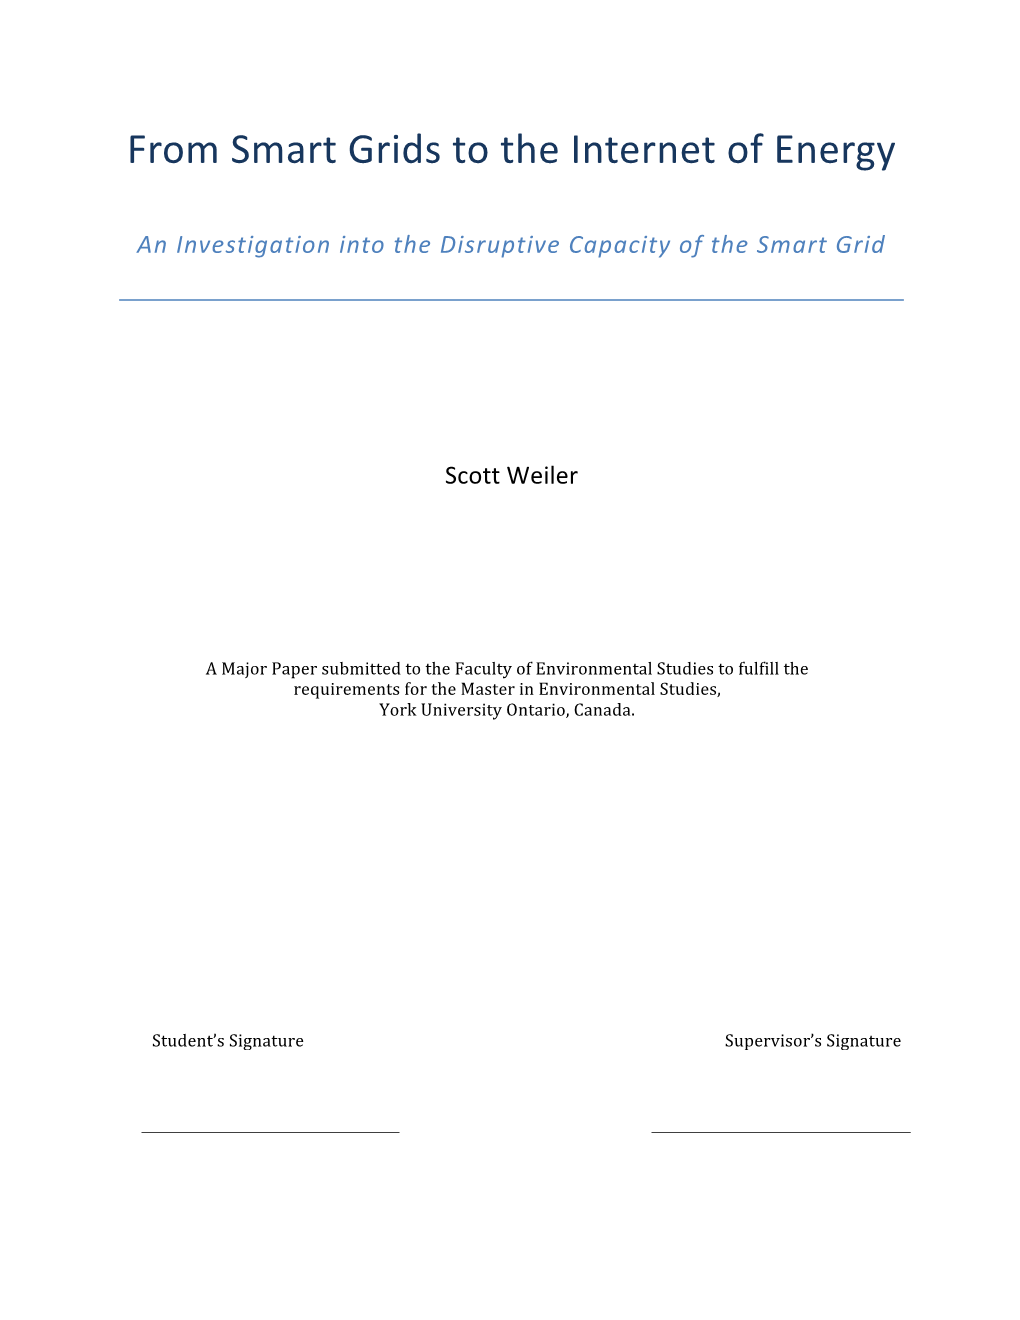 From Smart Grids to the Internet of Energy